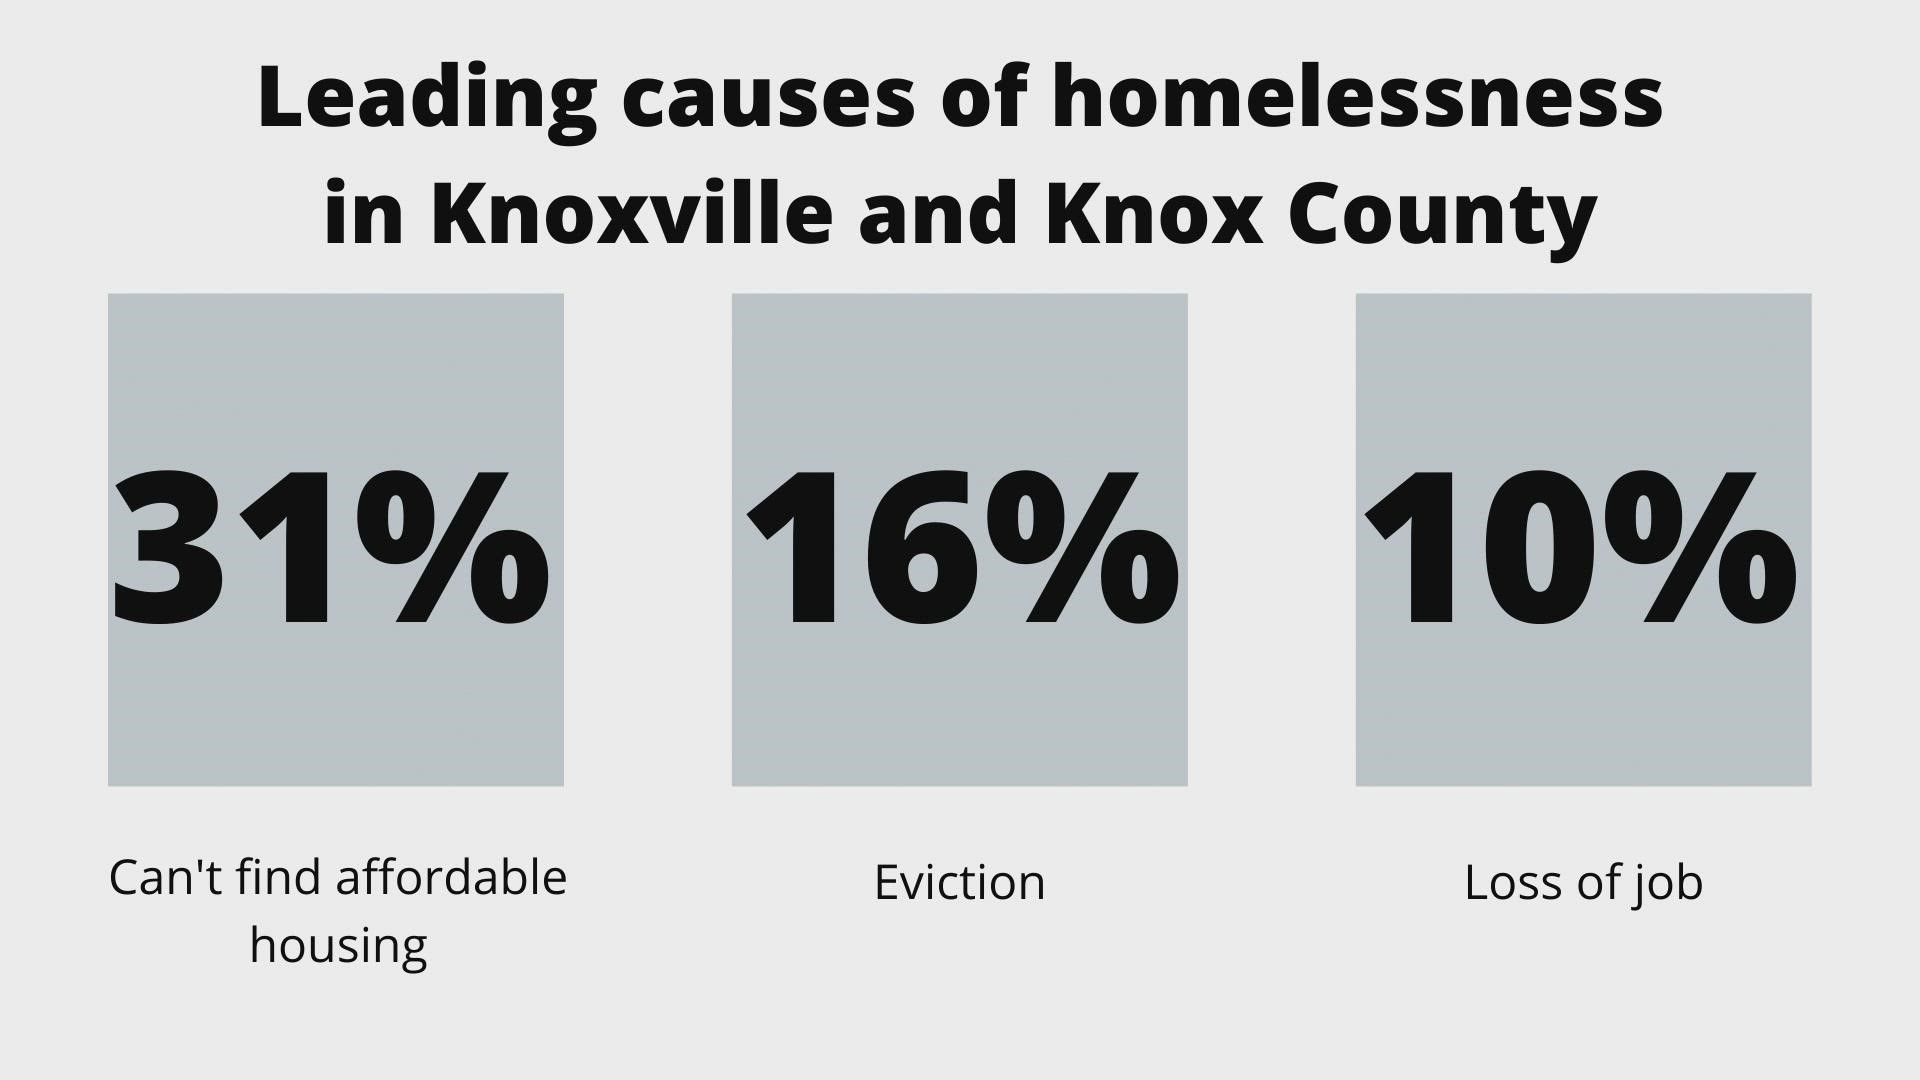 31% of those homeless in Knox County couldn't find affordable housing.